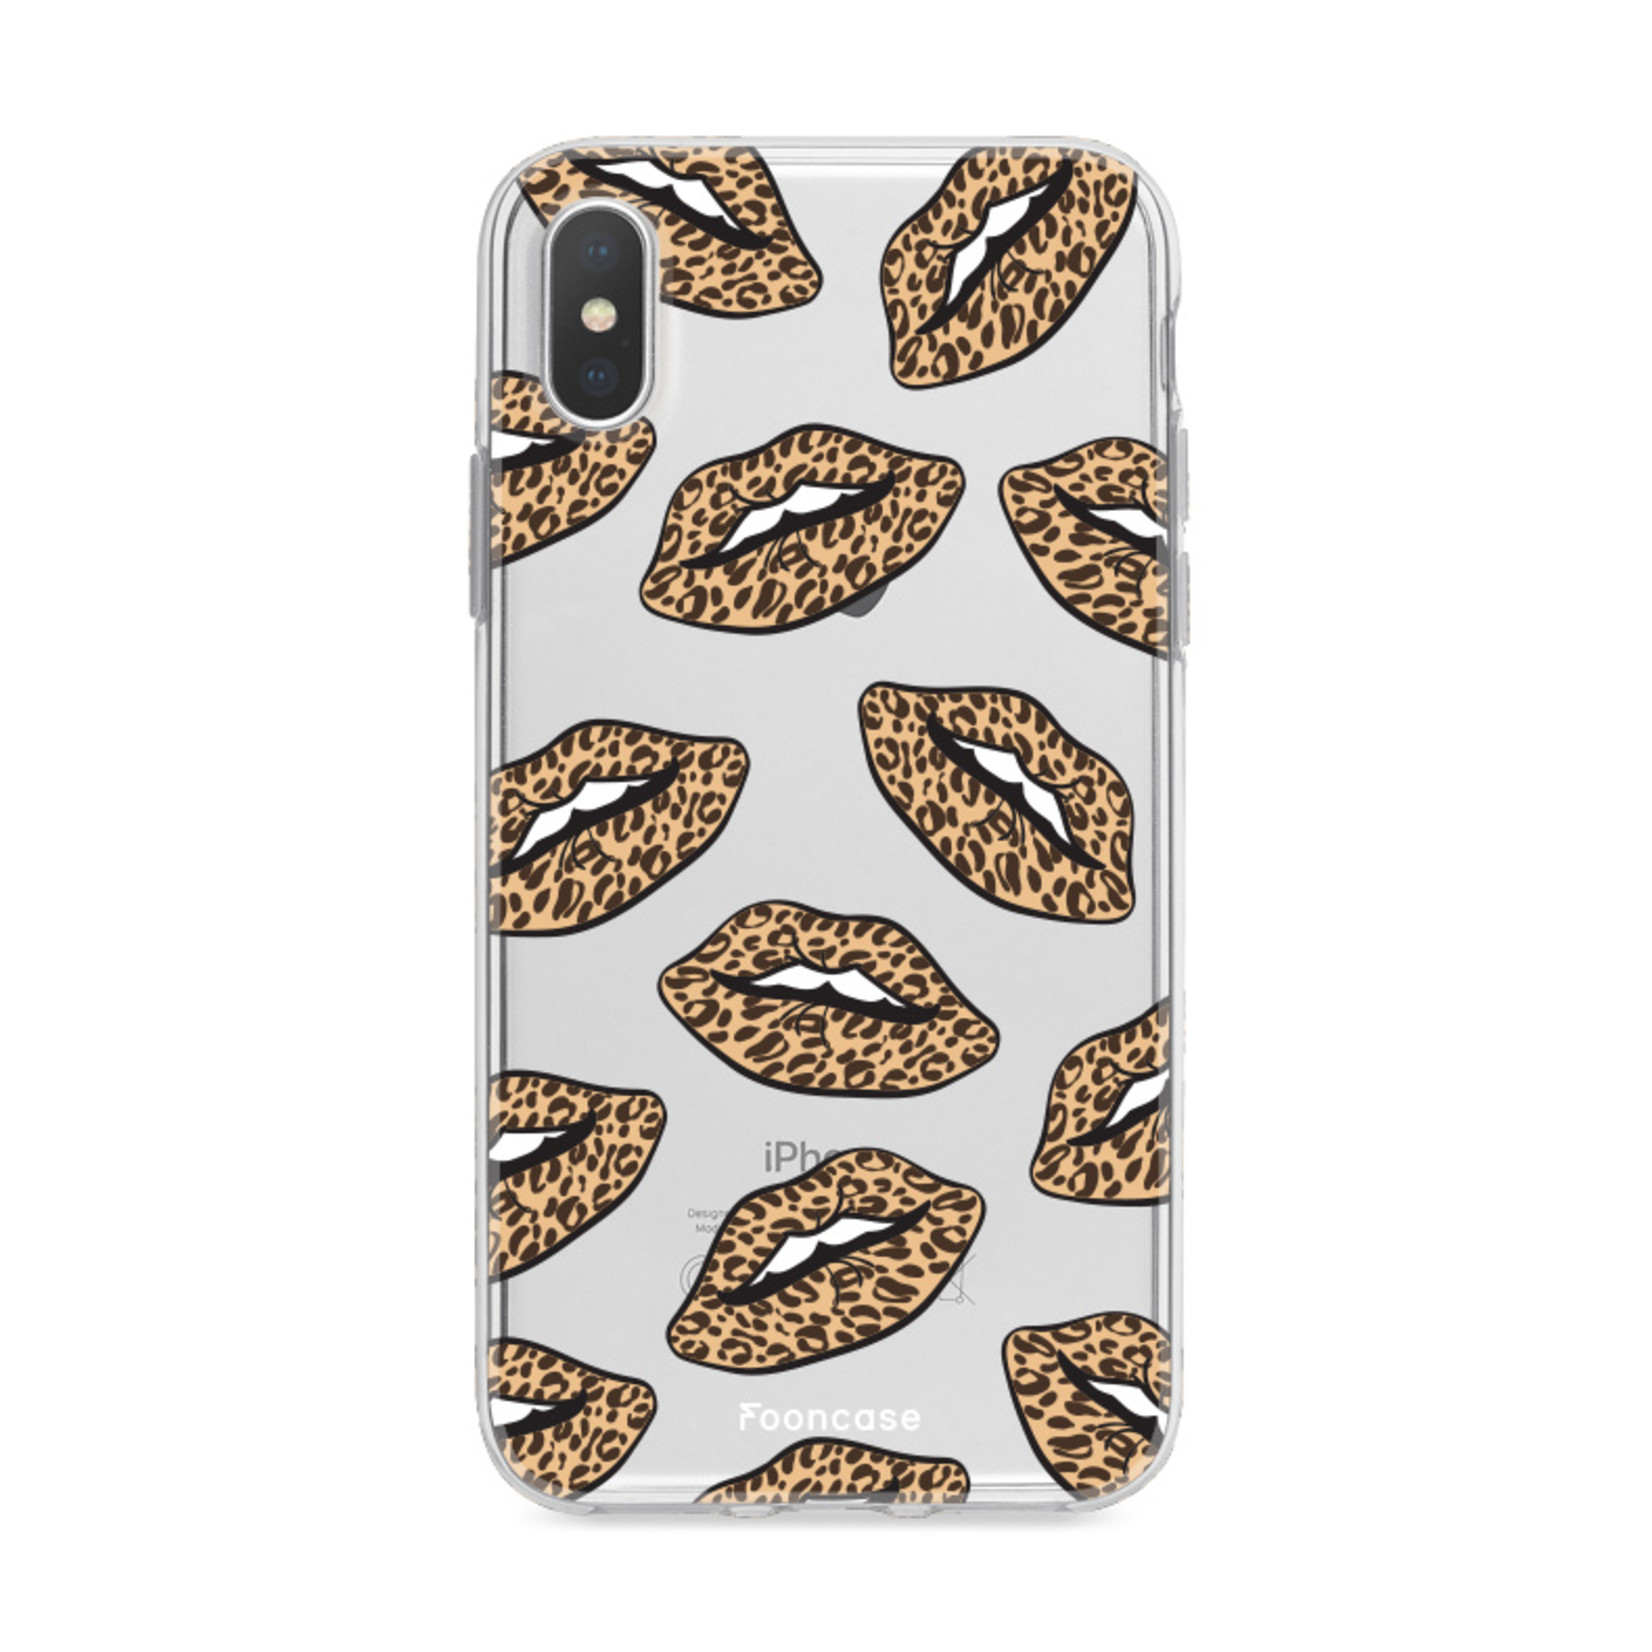 Iphone XS Max Case - Rebell Lips